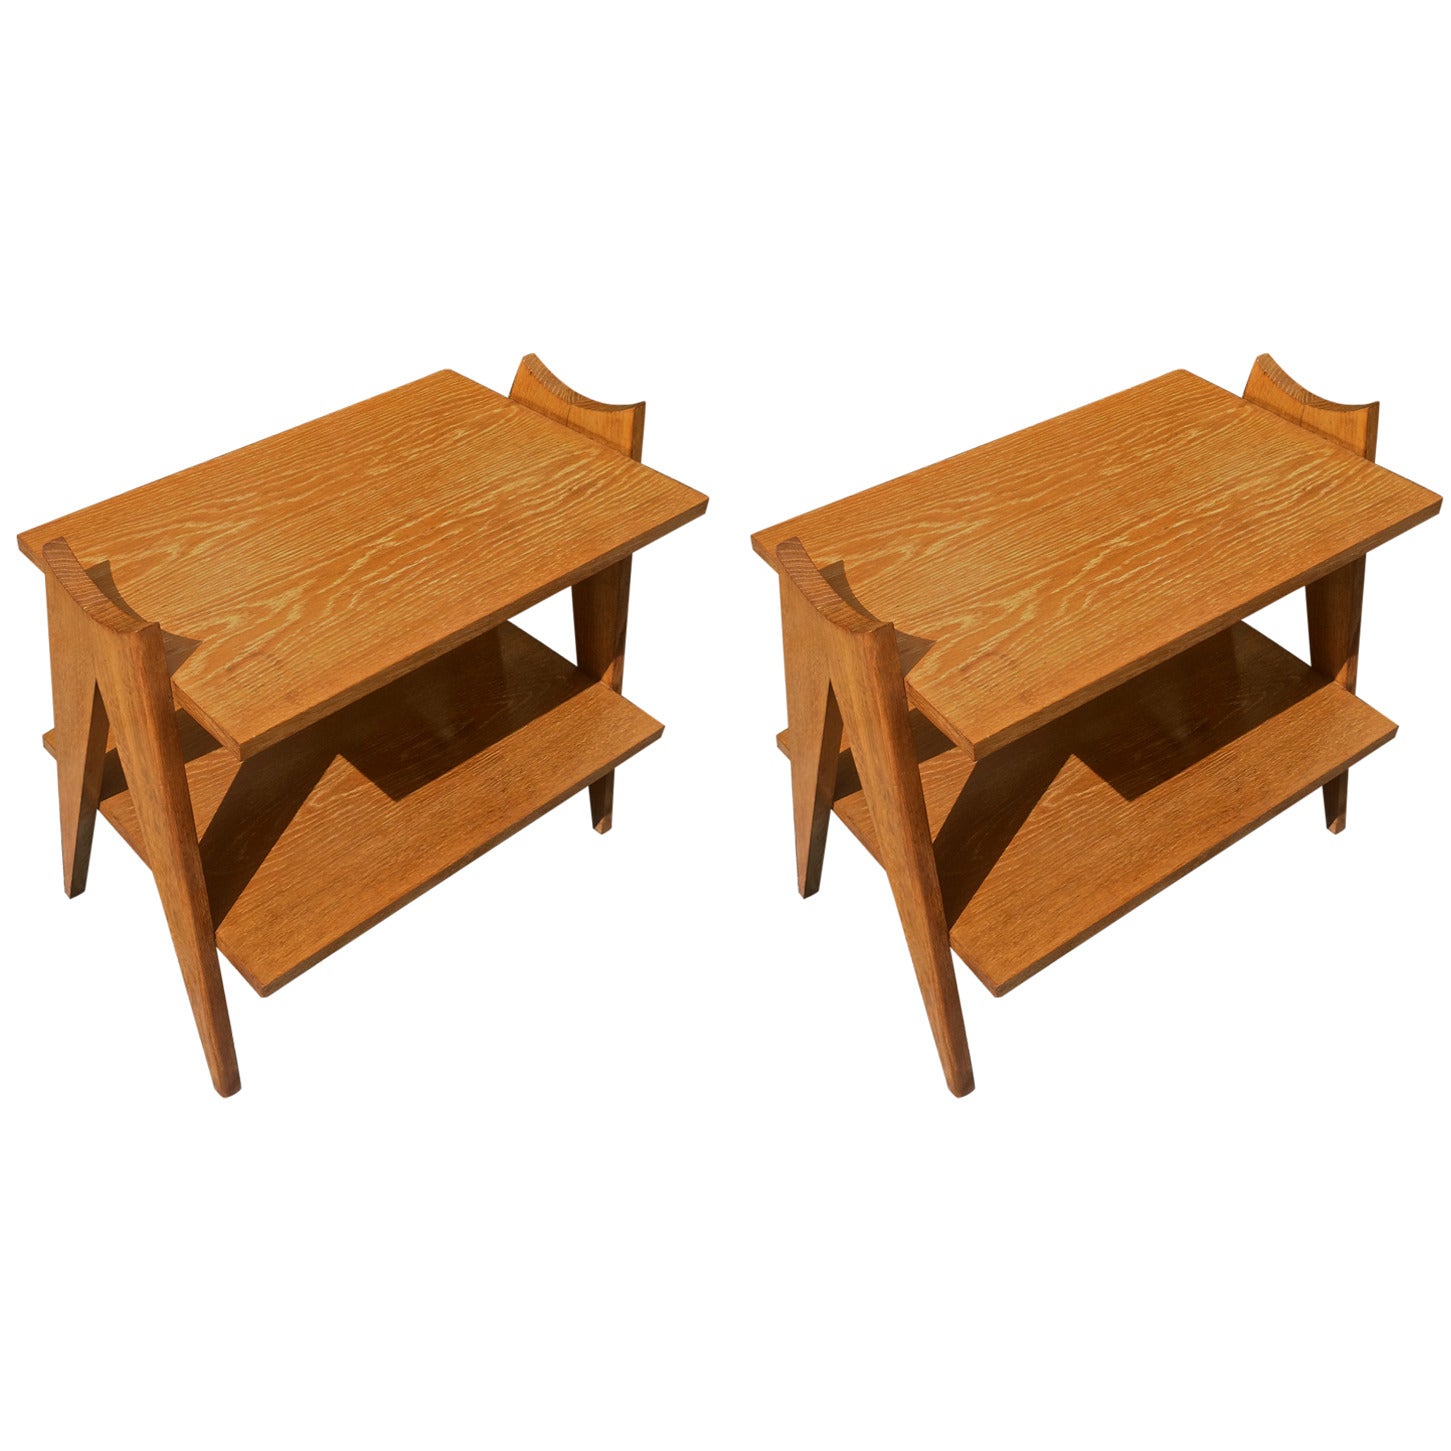 Style of Jean Prouve Pair of Two-Tier "Compas" Side Tables in Cerused Oak For Sale